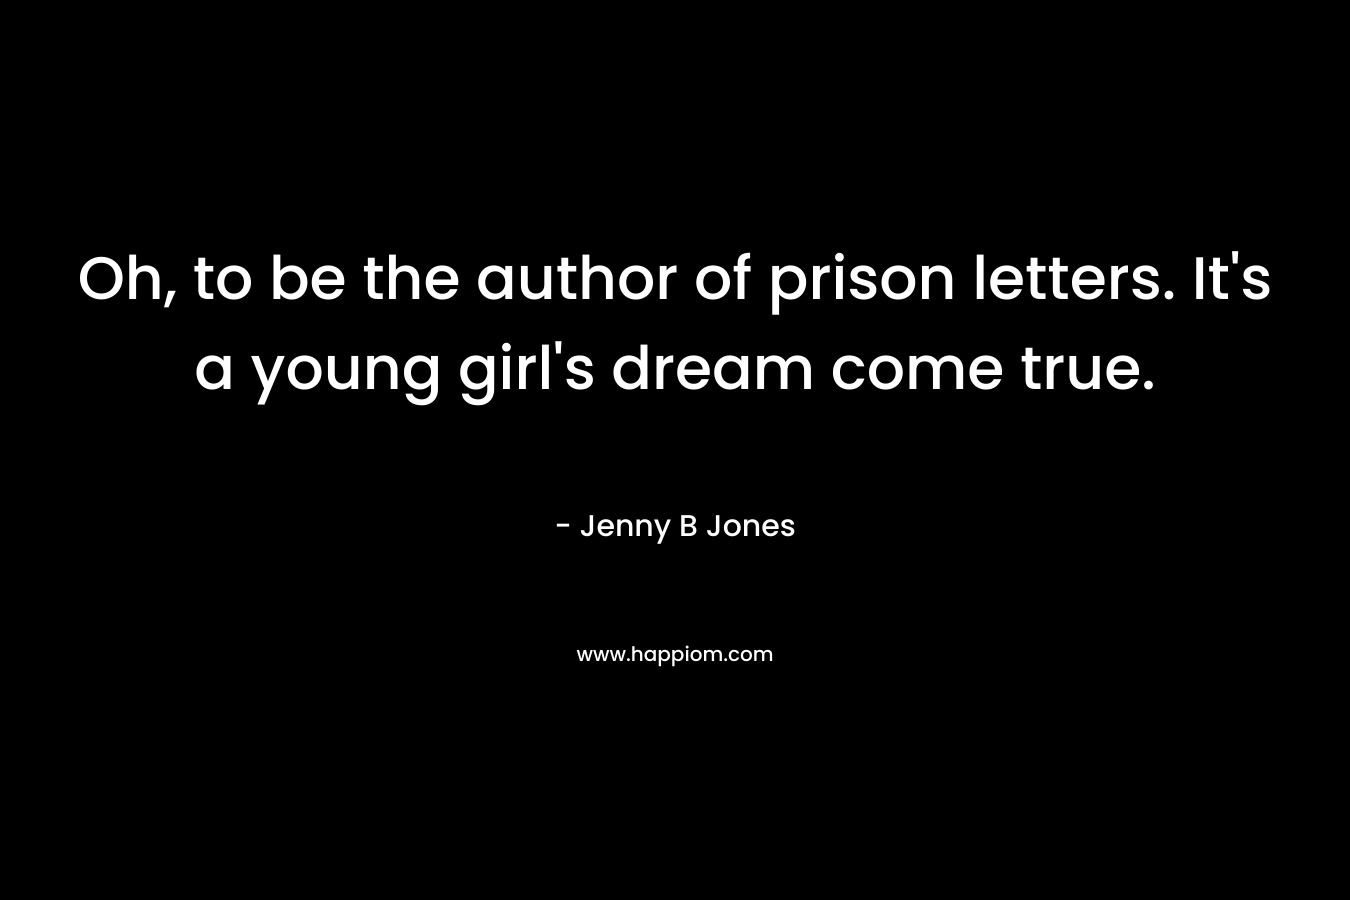 Oh, to be the author of prison letters. It’s a young girl’s dream come true. – Jenny B Jones